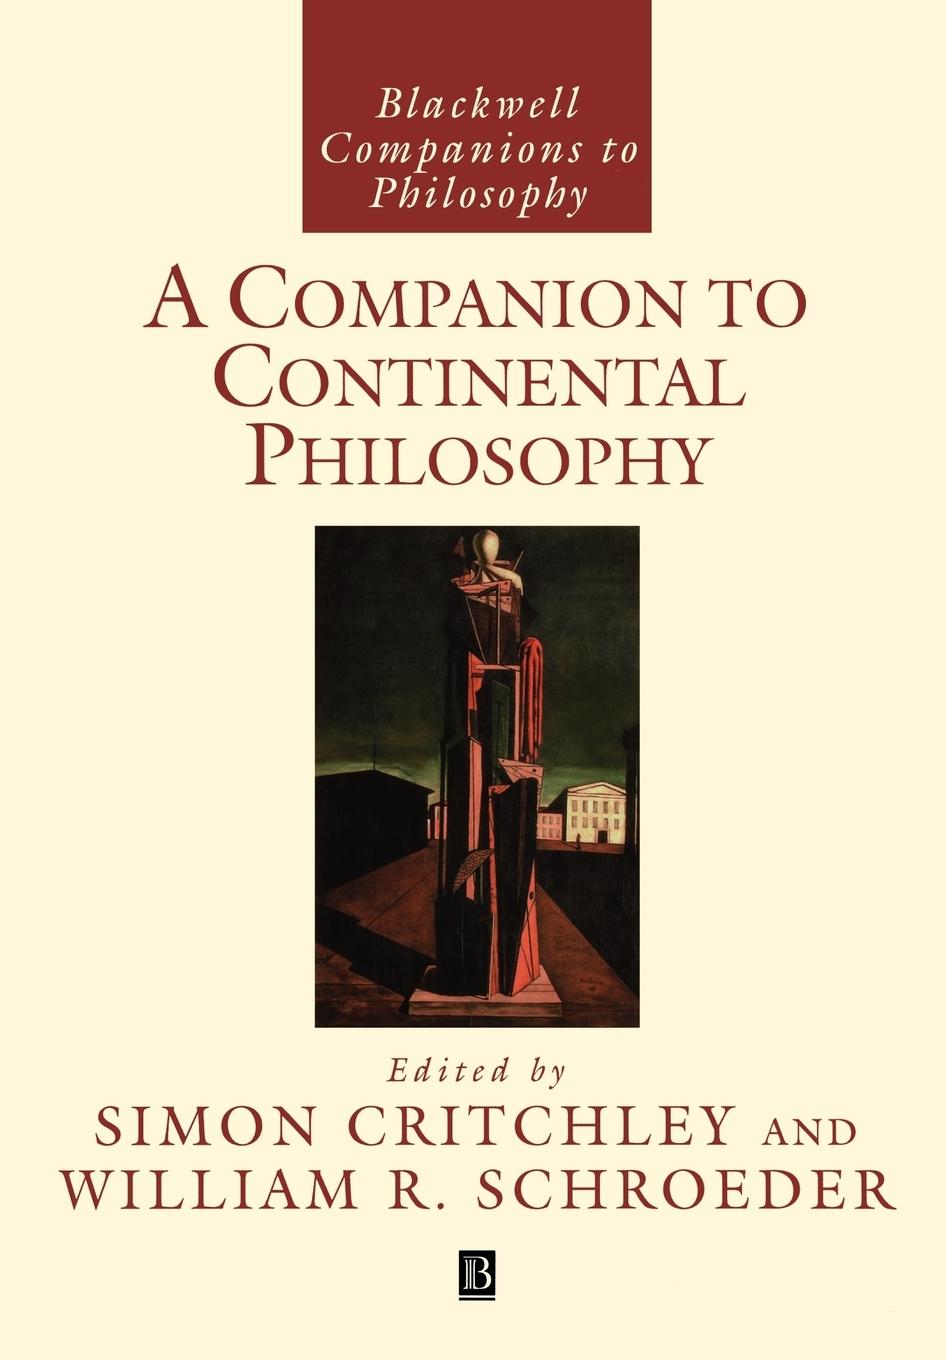 A Companion to Continental Philosophy - Critchley Schroeder